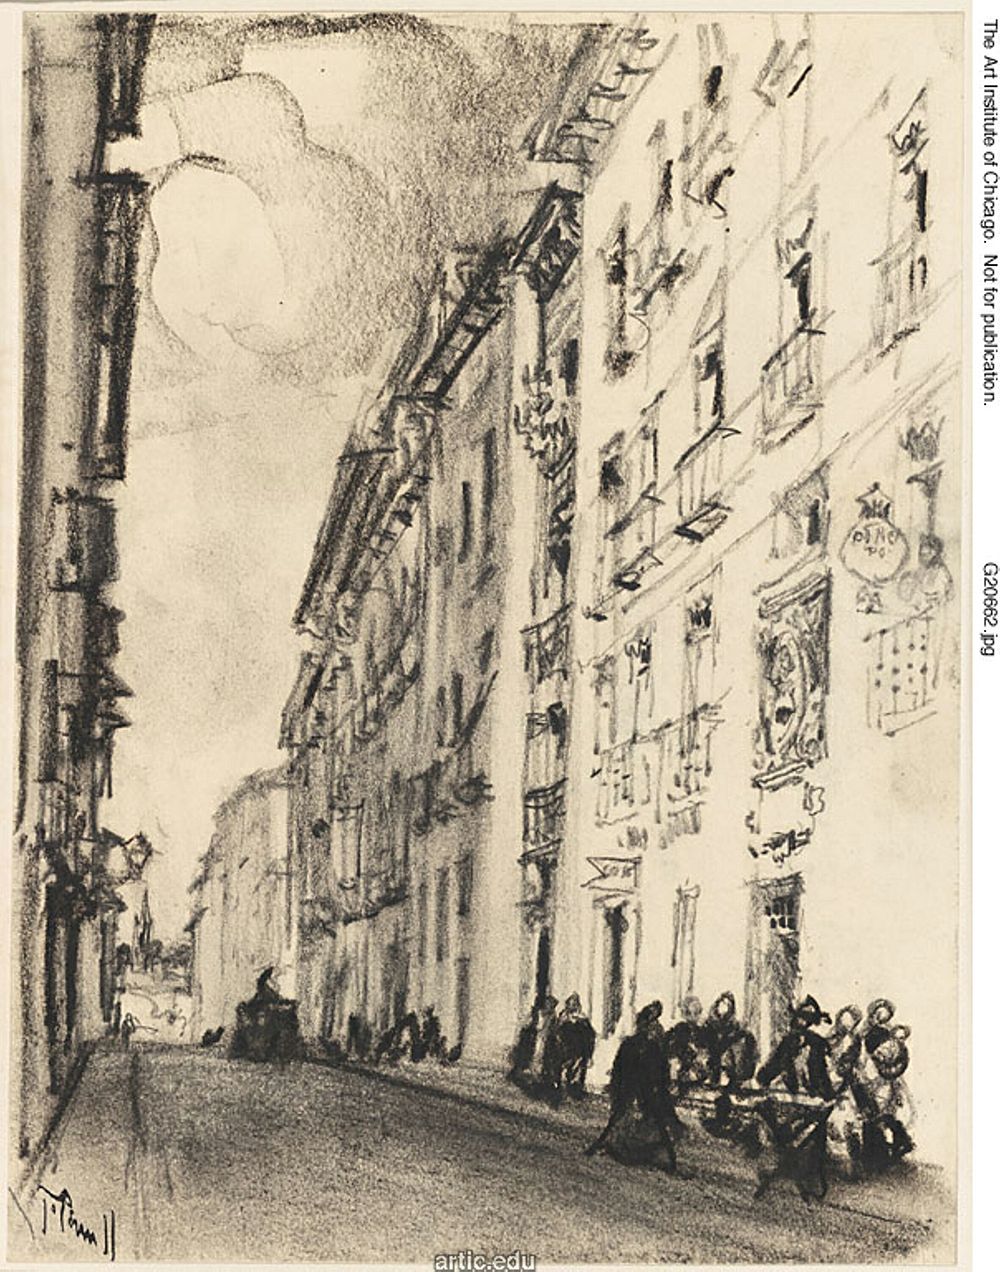 The Street of Cervantés and Lope de Vega, Madrid by Joseph Pennell